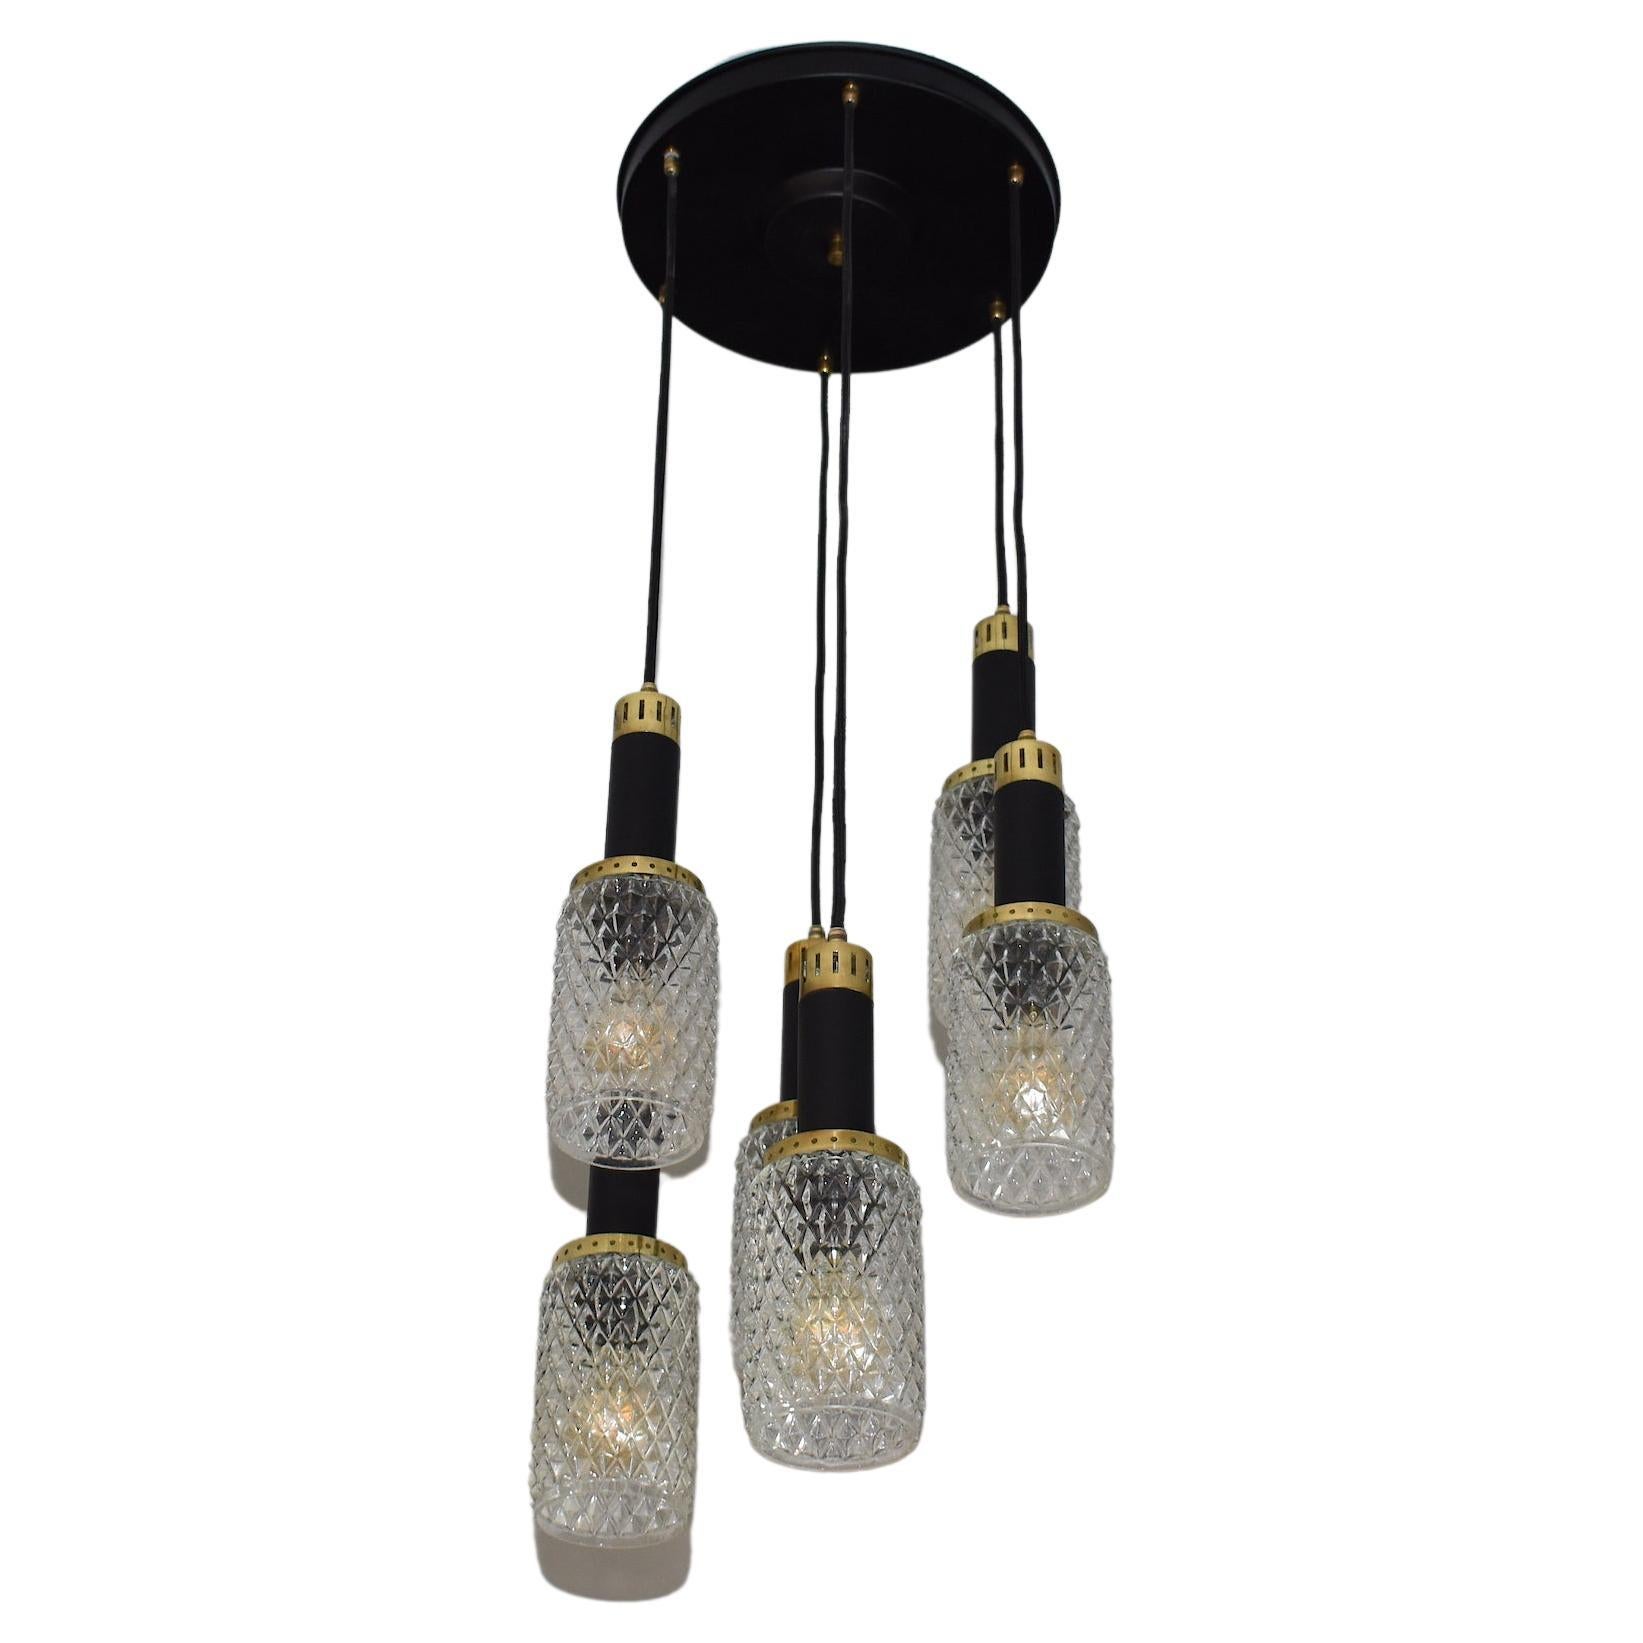 A fantastic Mid-Century Modern Italian vintage 6-light pendant by Stilnovo. The shades are designed in high-quality textured glass and are highlighted by aluminum black and polished gold brass details. 
Italy. Circa 1950's. 
Universally wired and